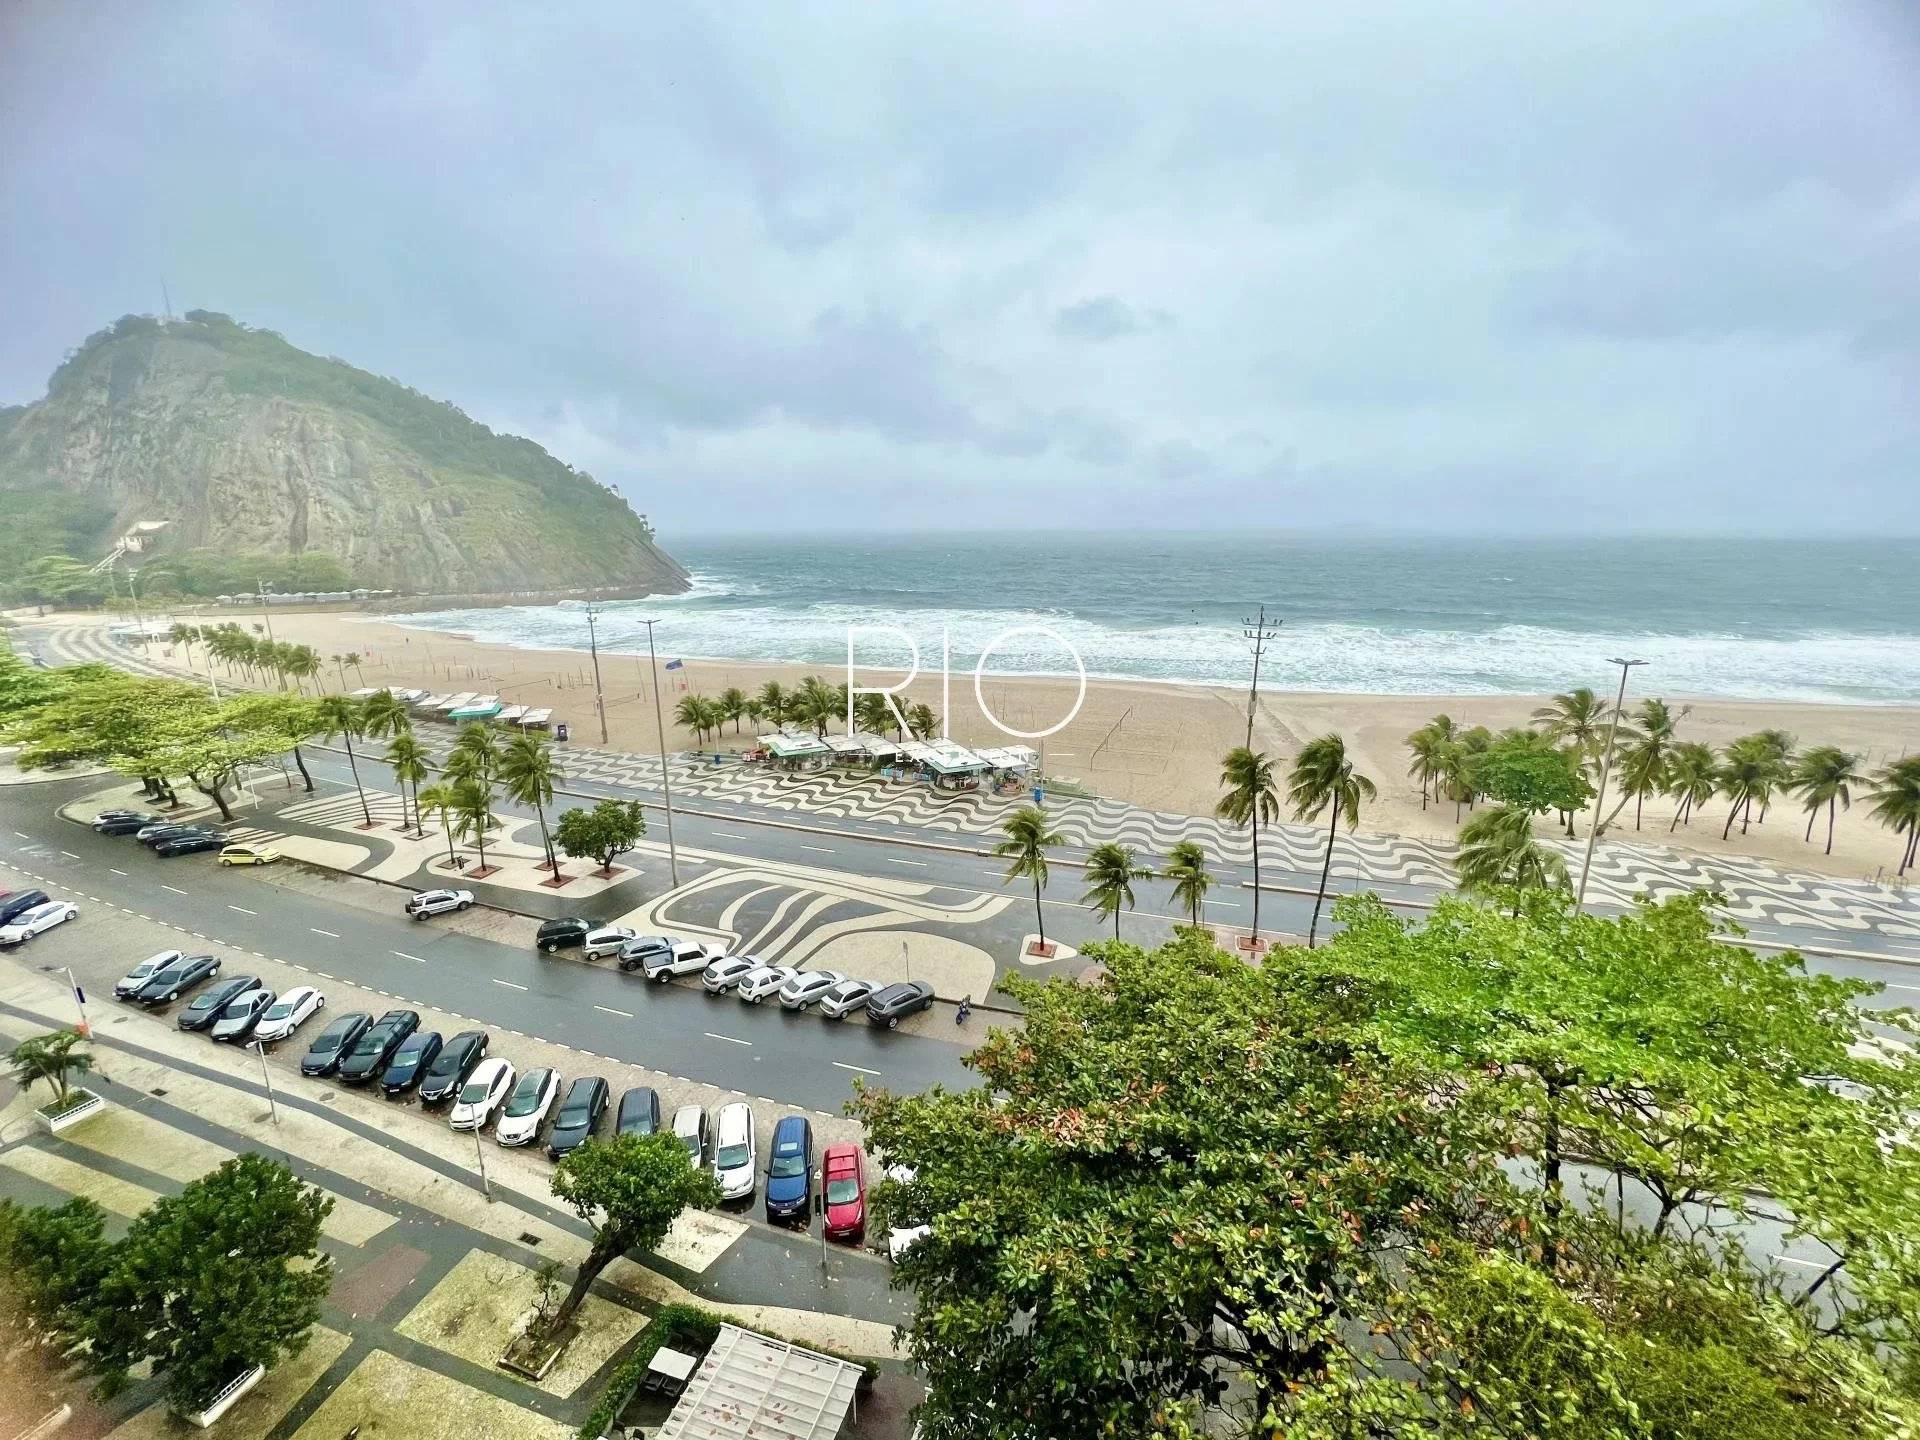 LEME facing the beach - Character apartment to renovate ! 150m2, 3 bedrooms, garage.